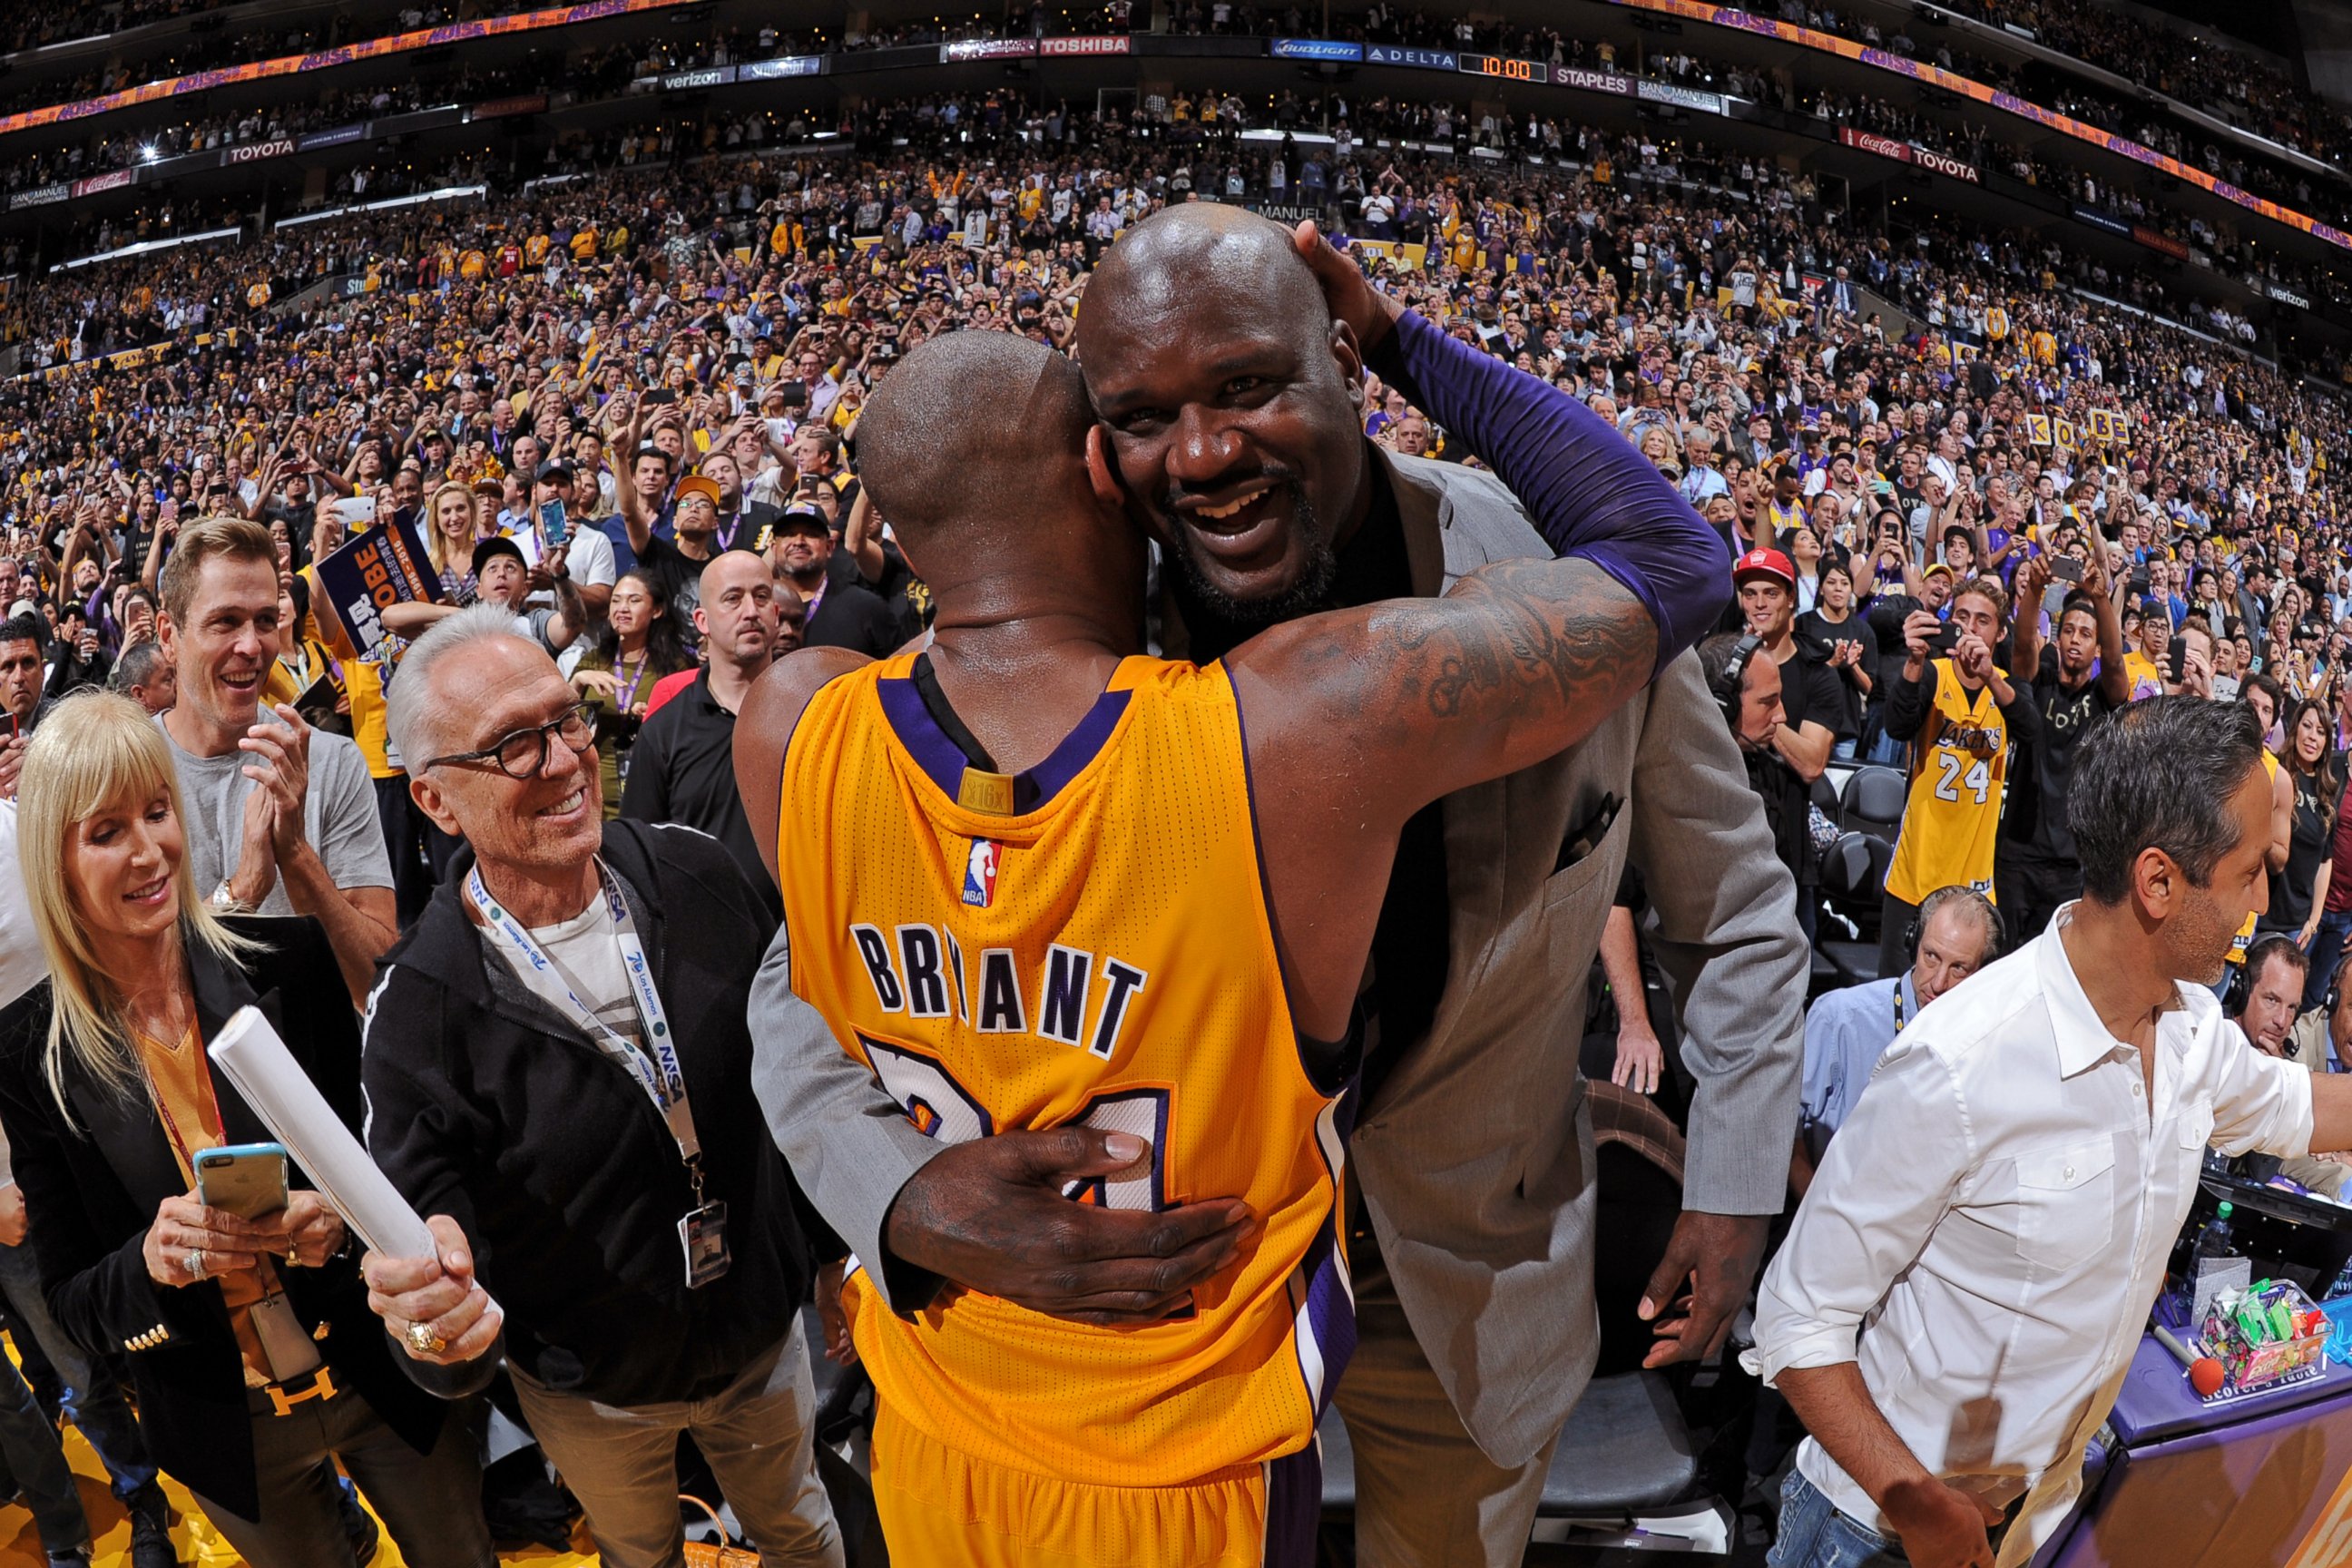 PHOTO: NBA Legend, Shaquille O'Neal and Kobe Bryant #24 of the Los Angeles Lakers hug after Bryant's final game, April 13, 2016, at Staples Center in Los Angeles, California. 